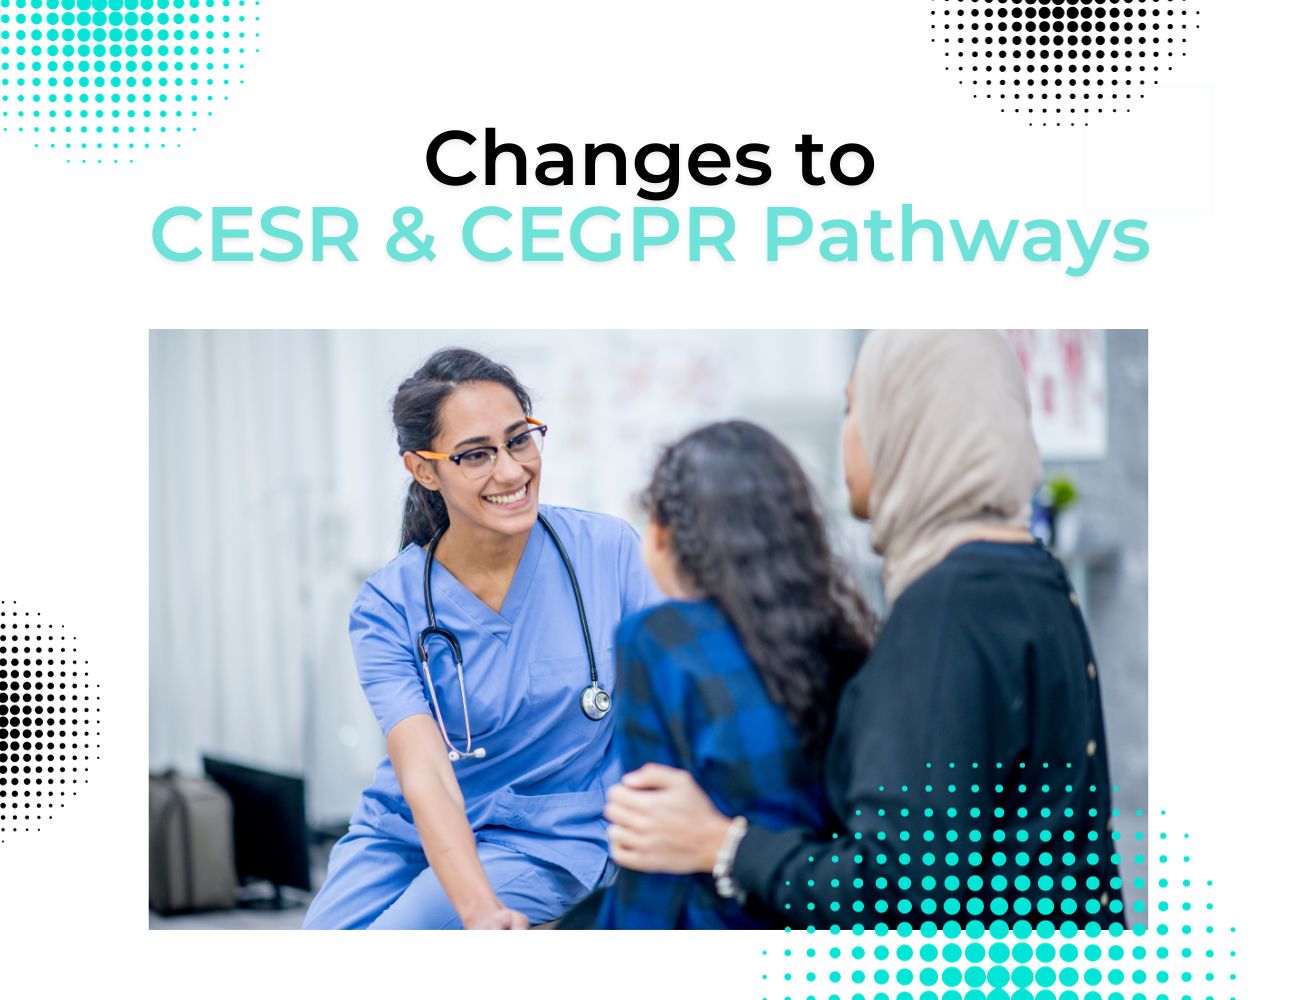 Changes to CESR & CEGPR pathways